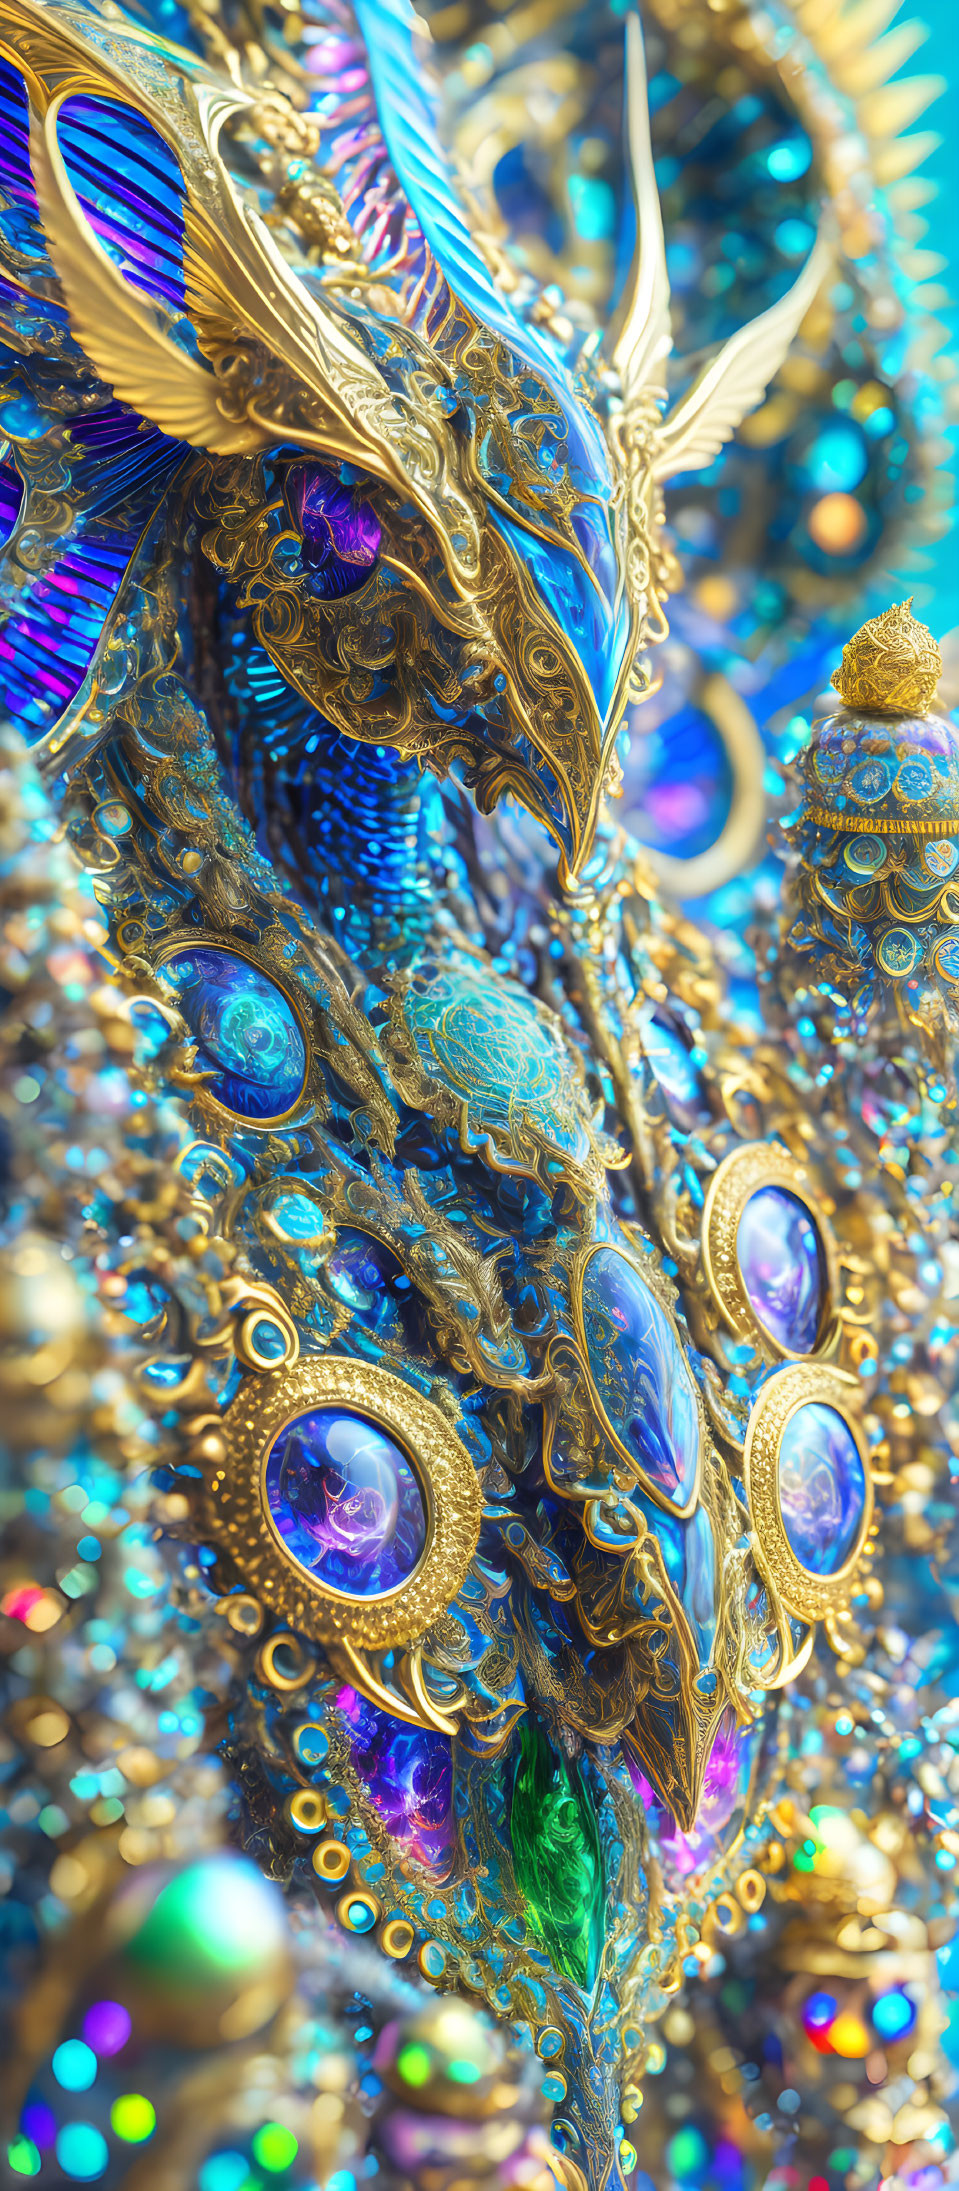 Golden Peacock Mask with Gemstones and Ornate Textures